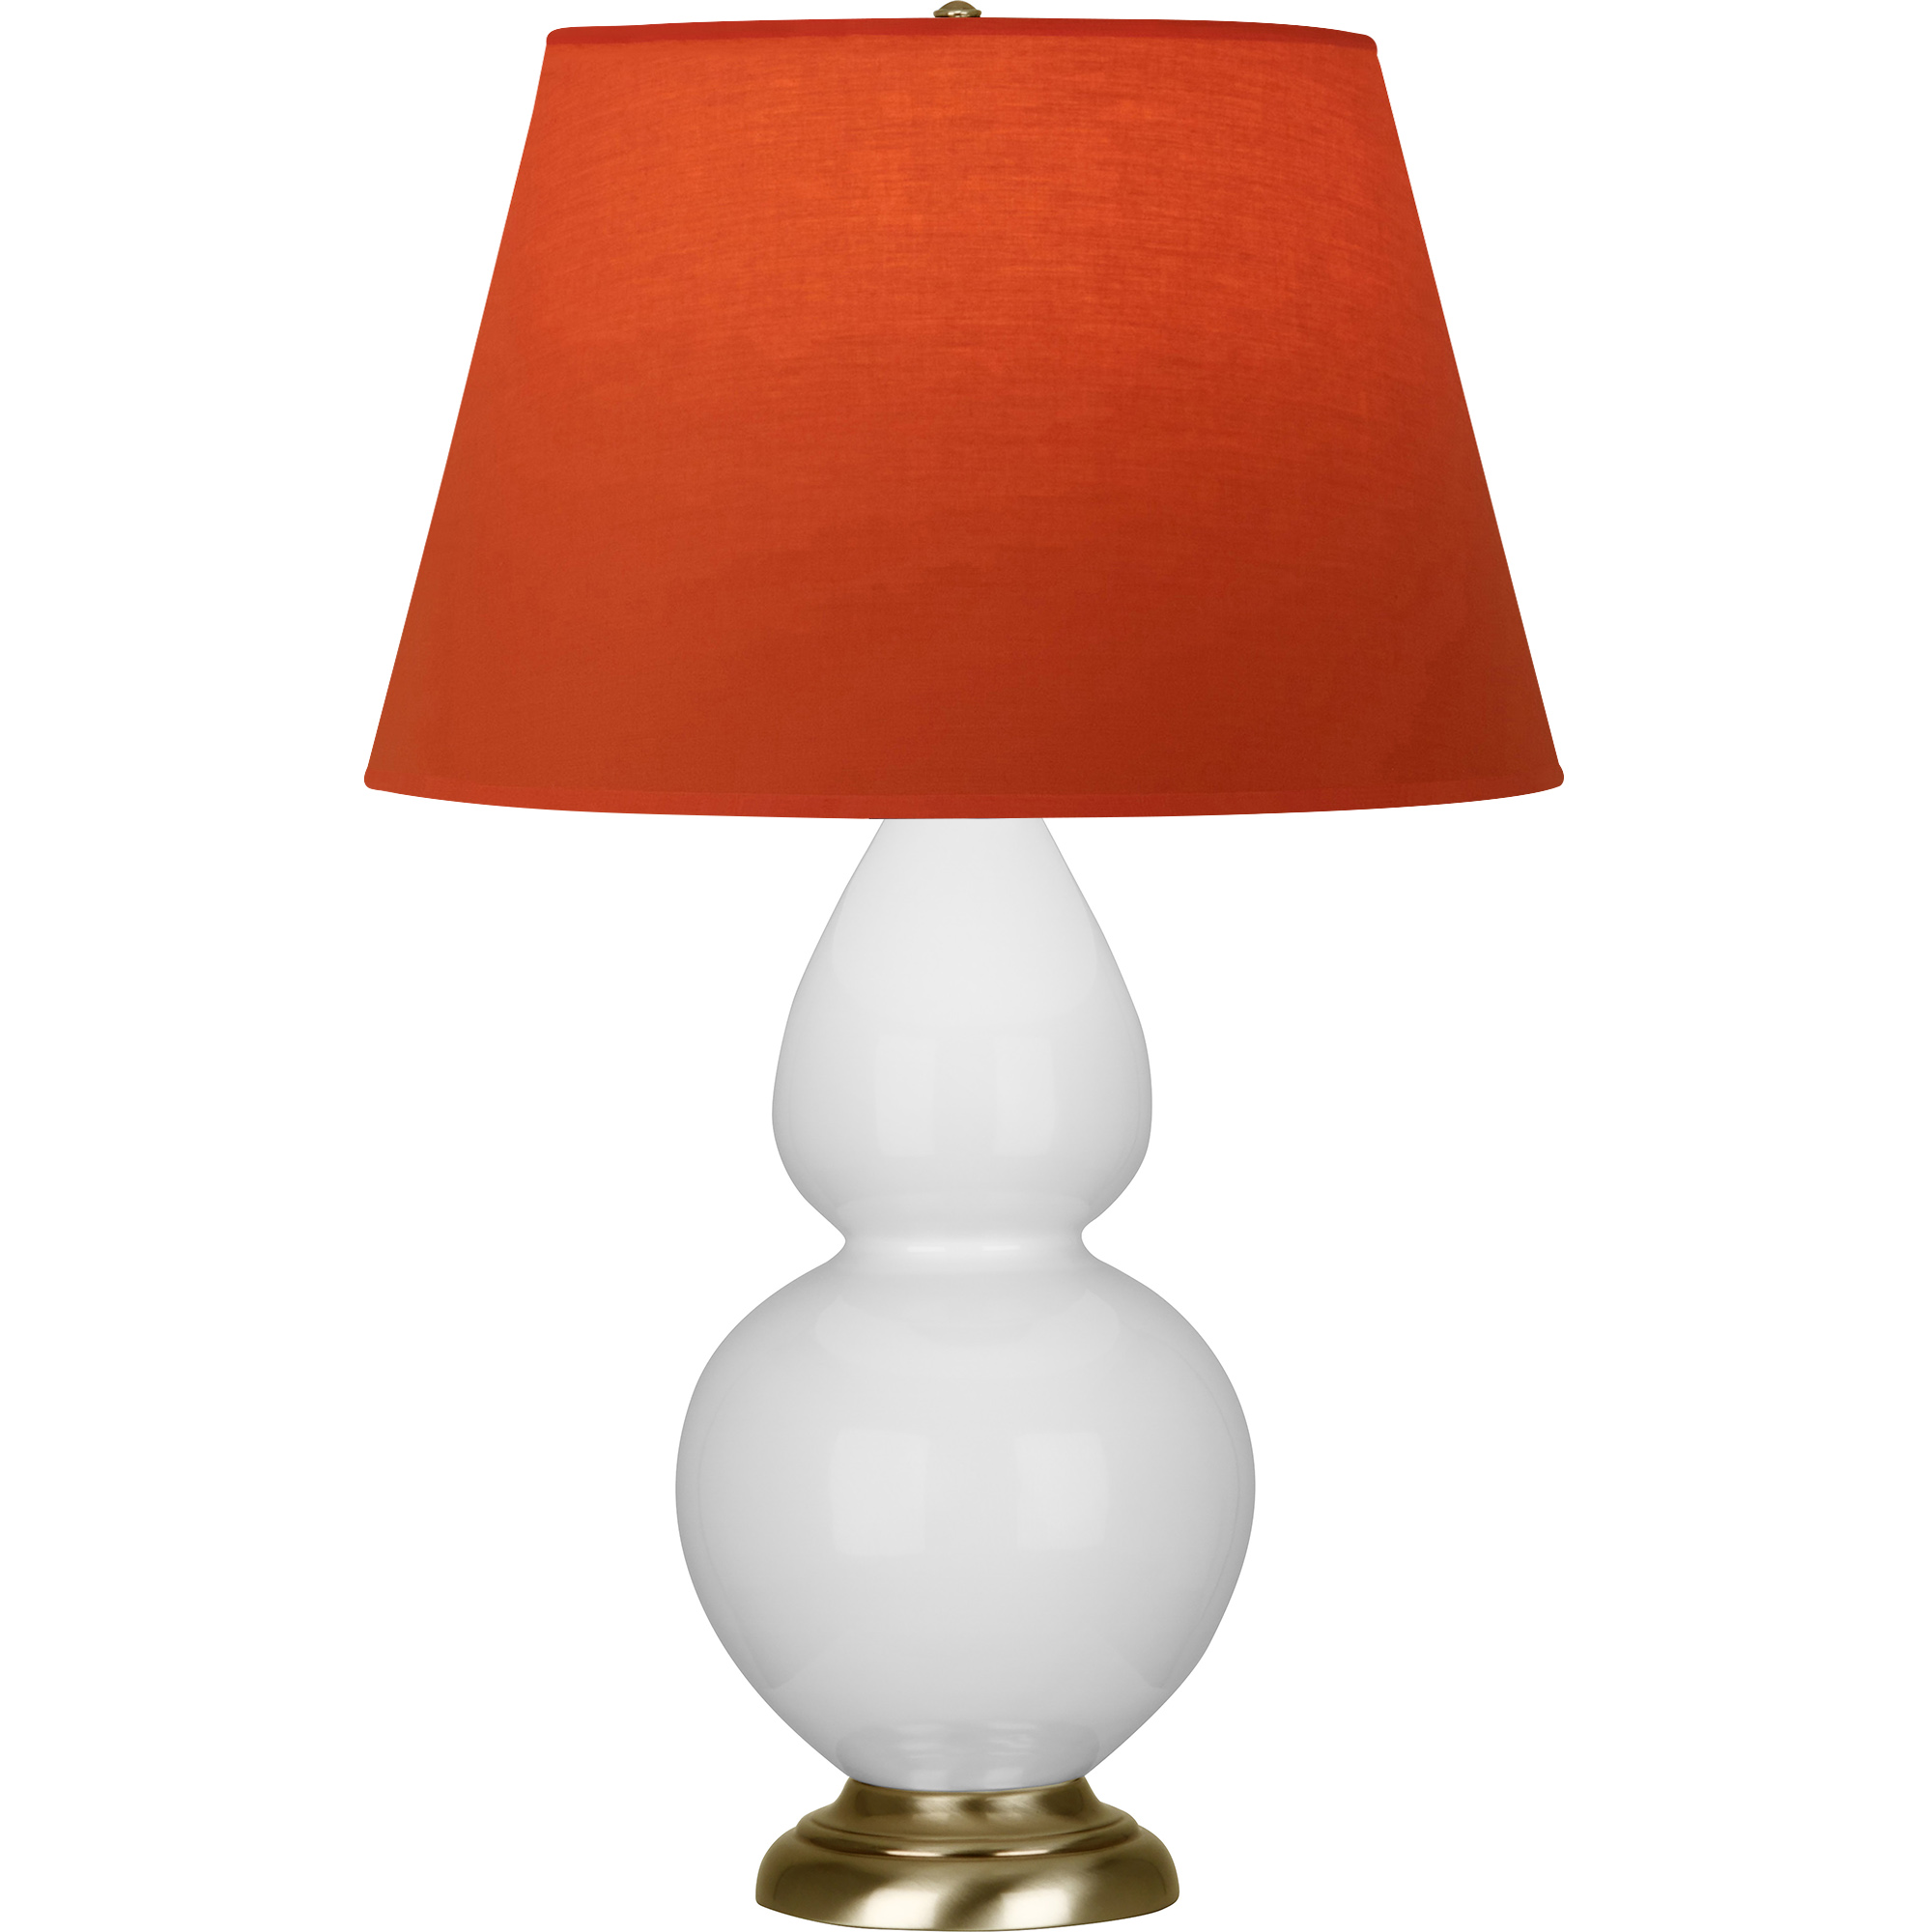 Double Gourd Table Lamp Style #DY20T